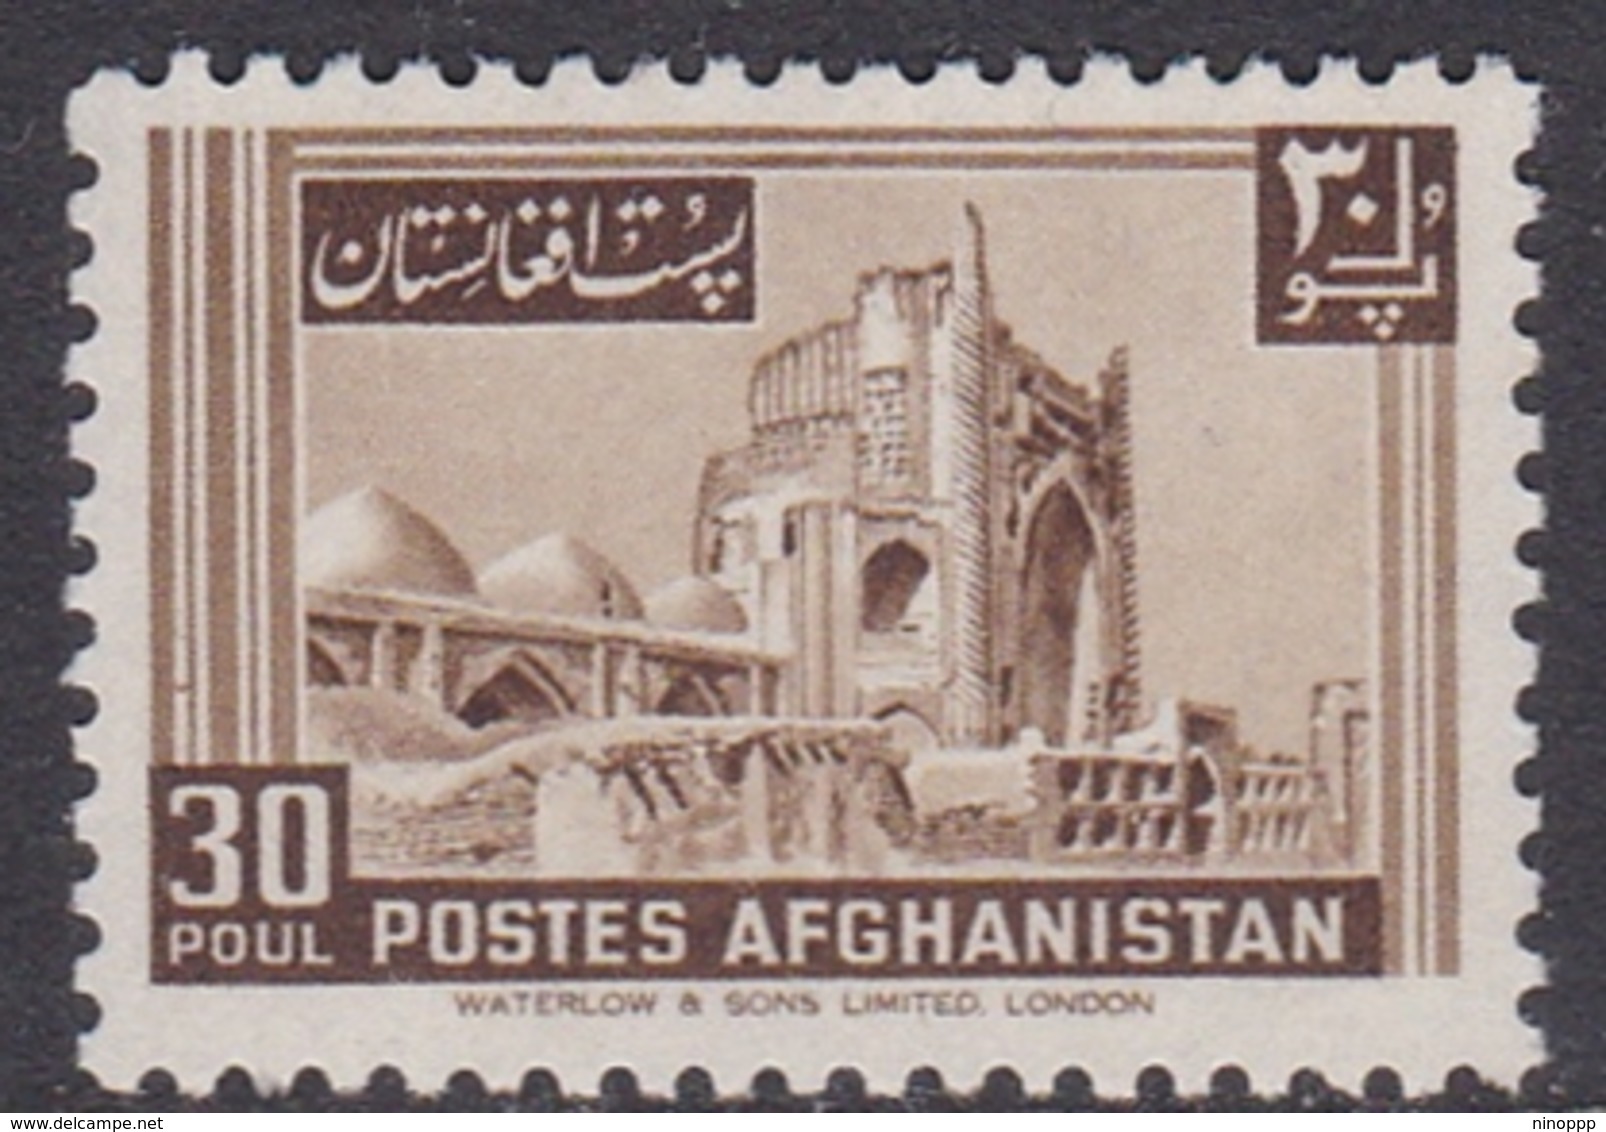 Afghanistan SG 425 1957 Pictorials 30p Brown Mosque MNH - Afghanistan